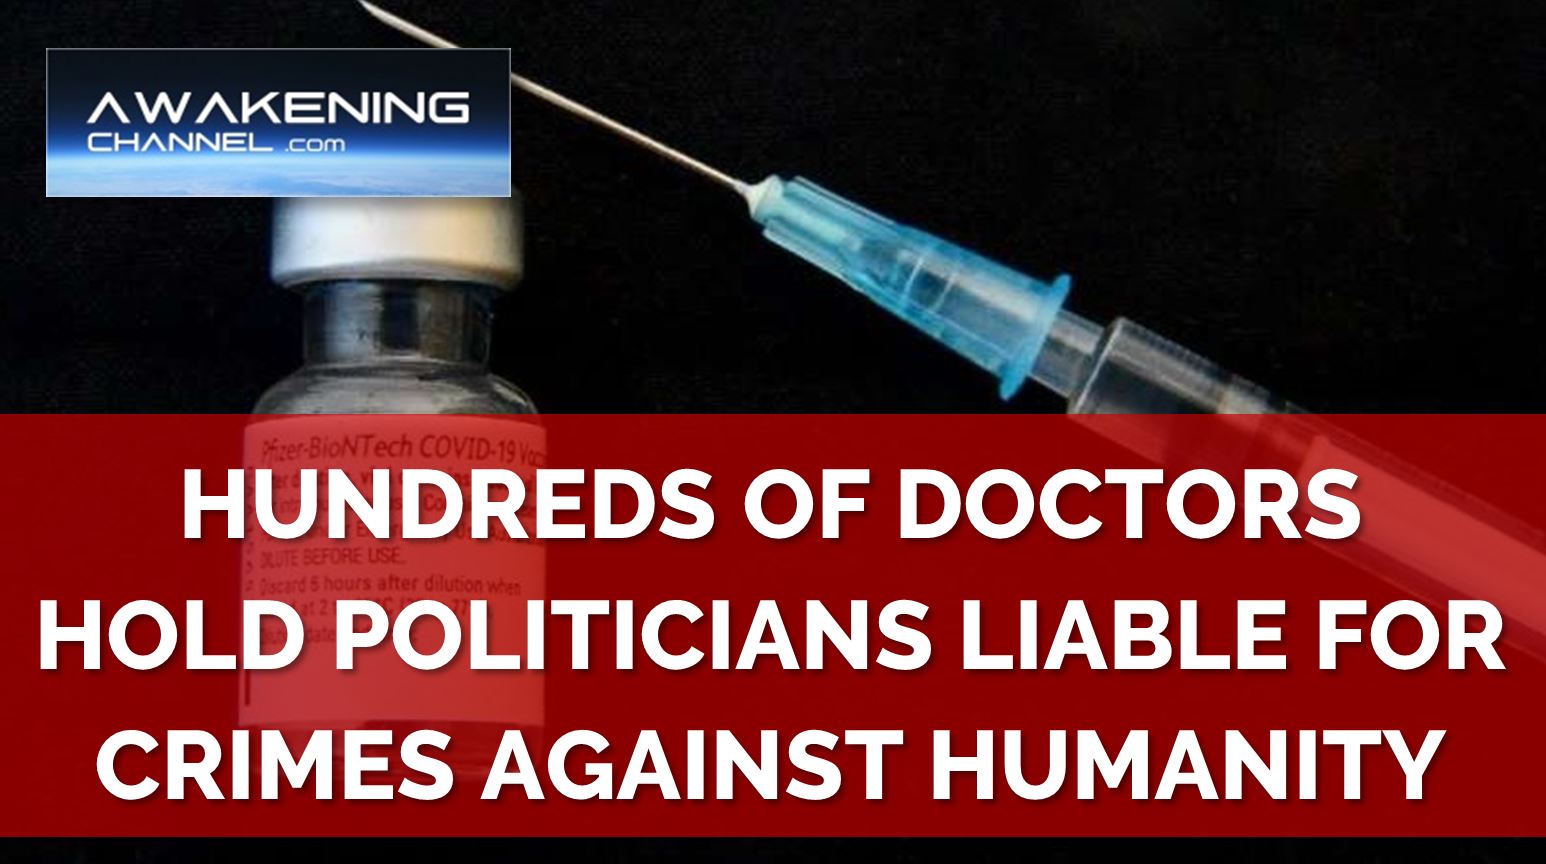 Vaccine: Hundreds of Doctors and Scientists Hold the European Medicines Agency and the European Parliament Liable For Crimes Against Humanity